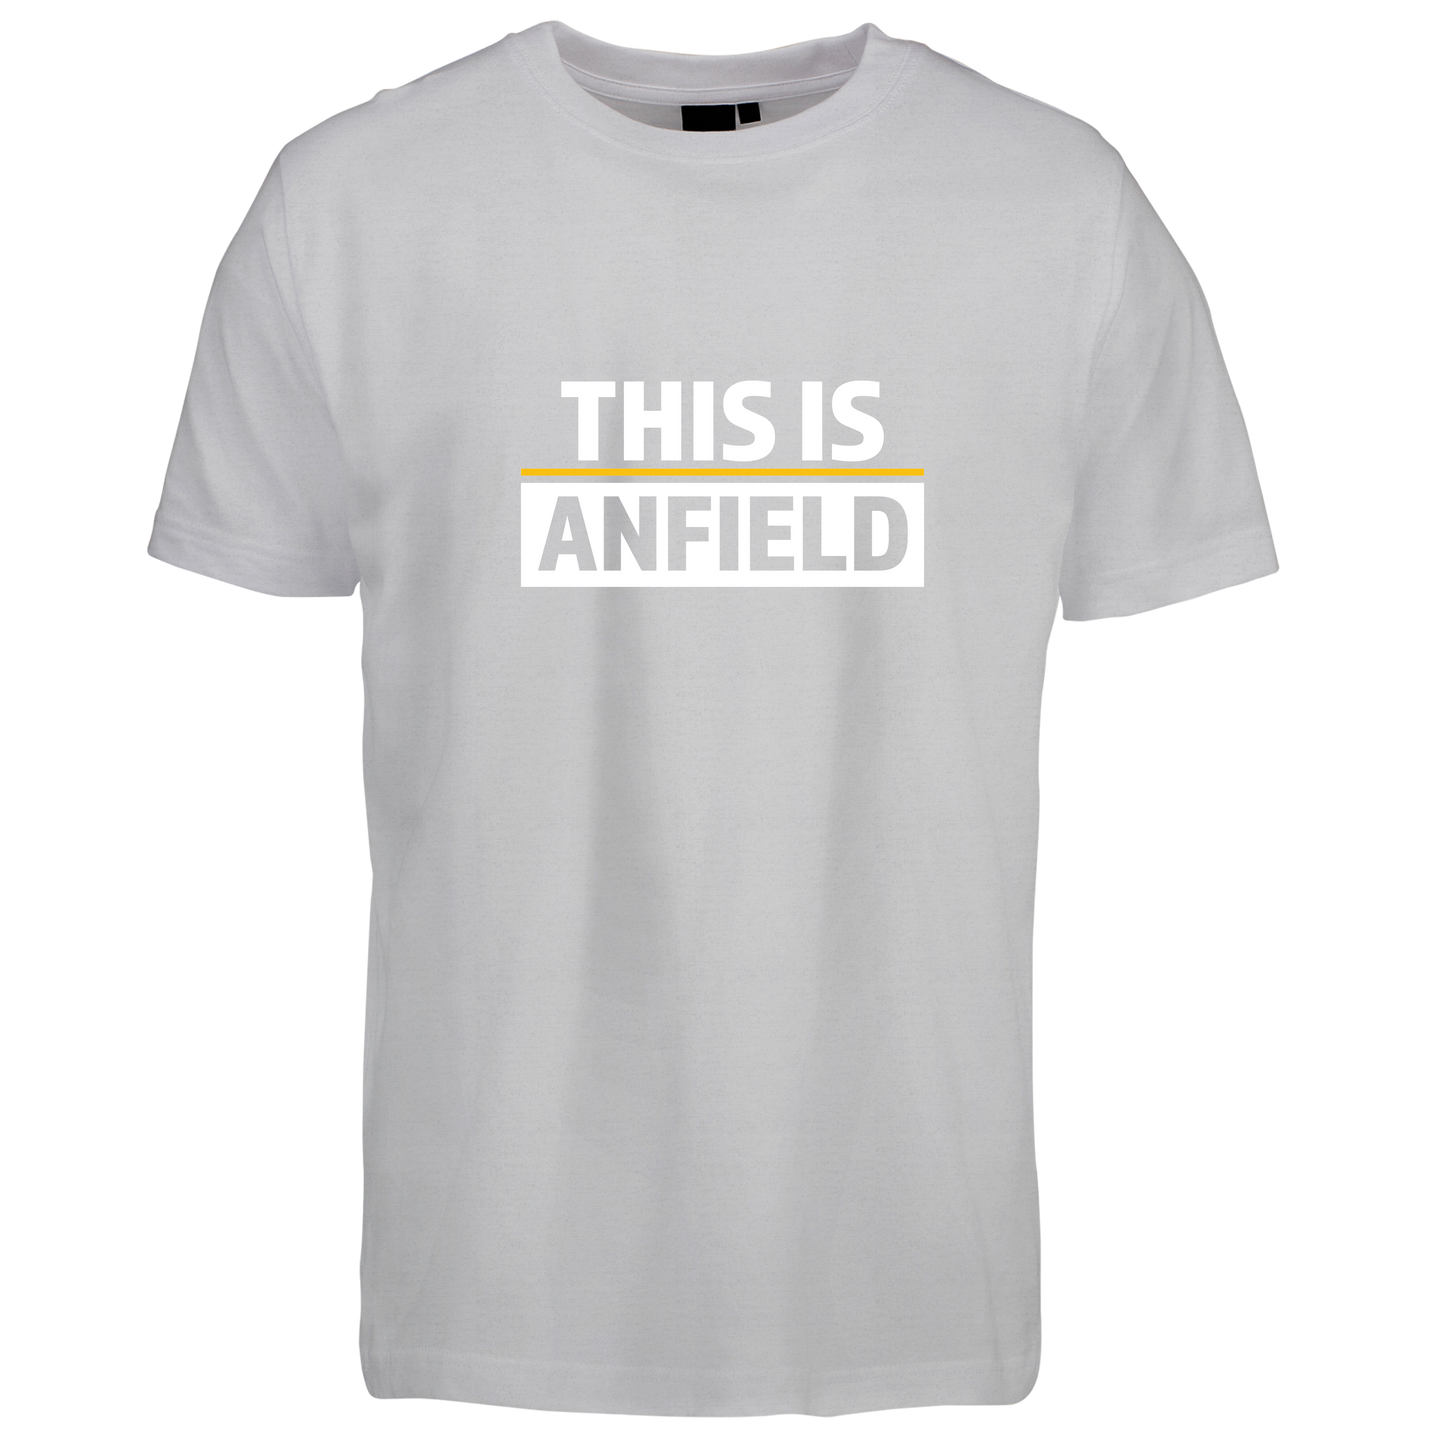 This is anfield - t-shirt